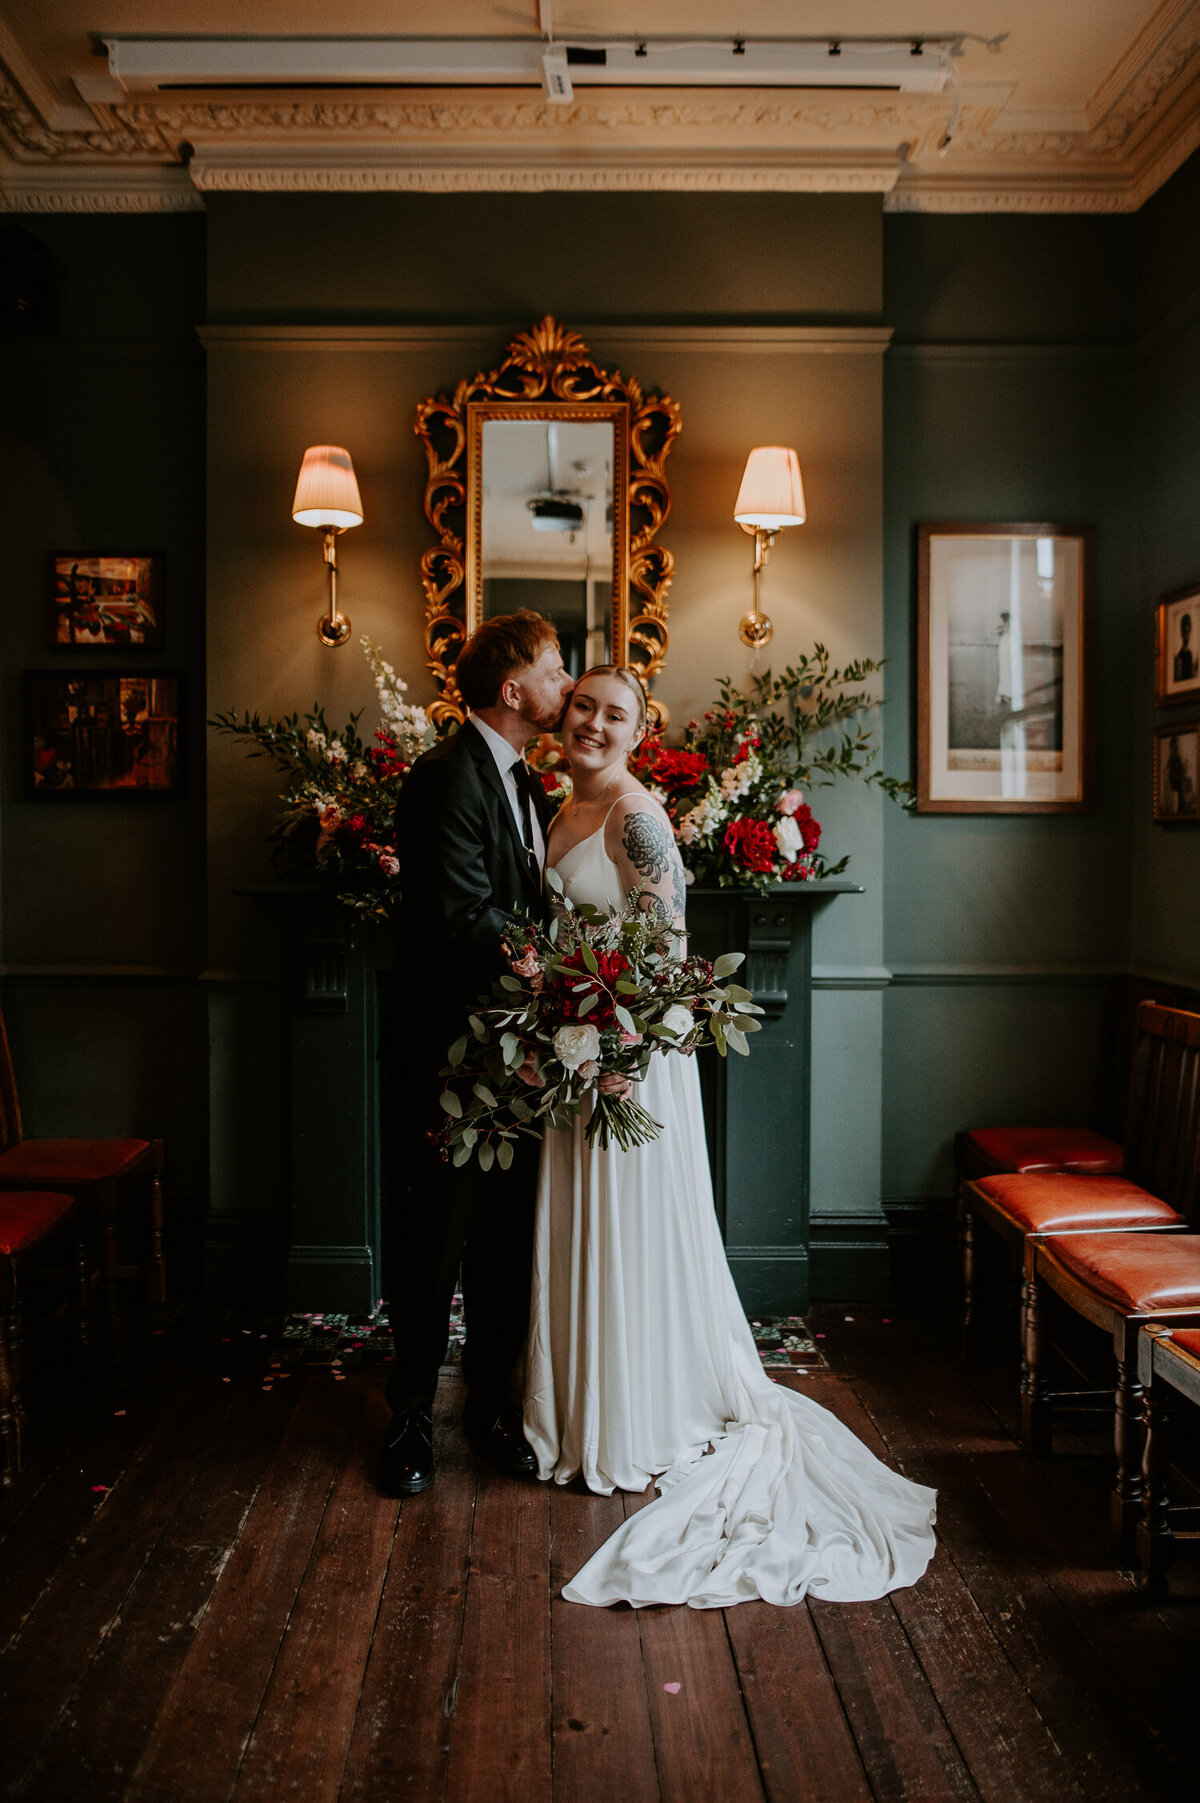 A couple stand in front of a large fireplace at their reception in London after marrying at The Old Marylebone Town Hall.